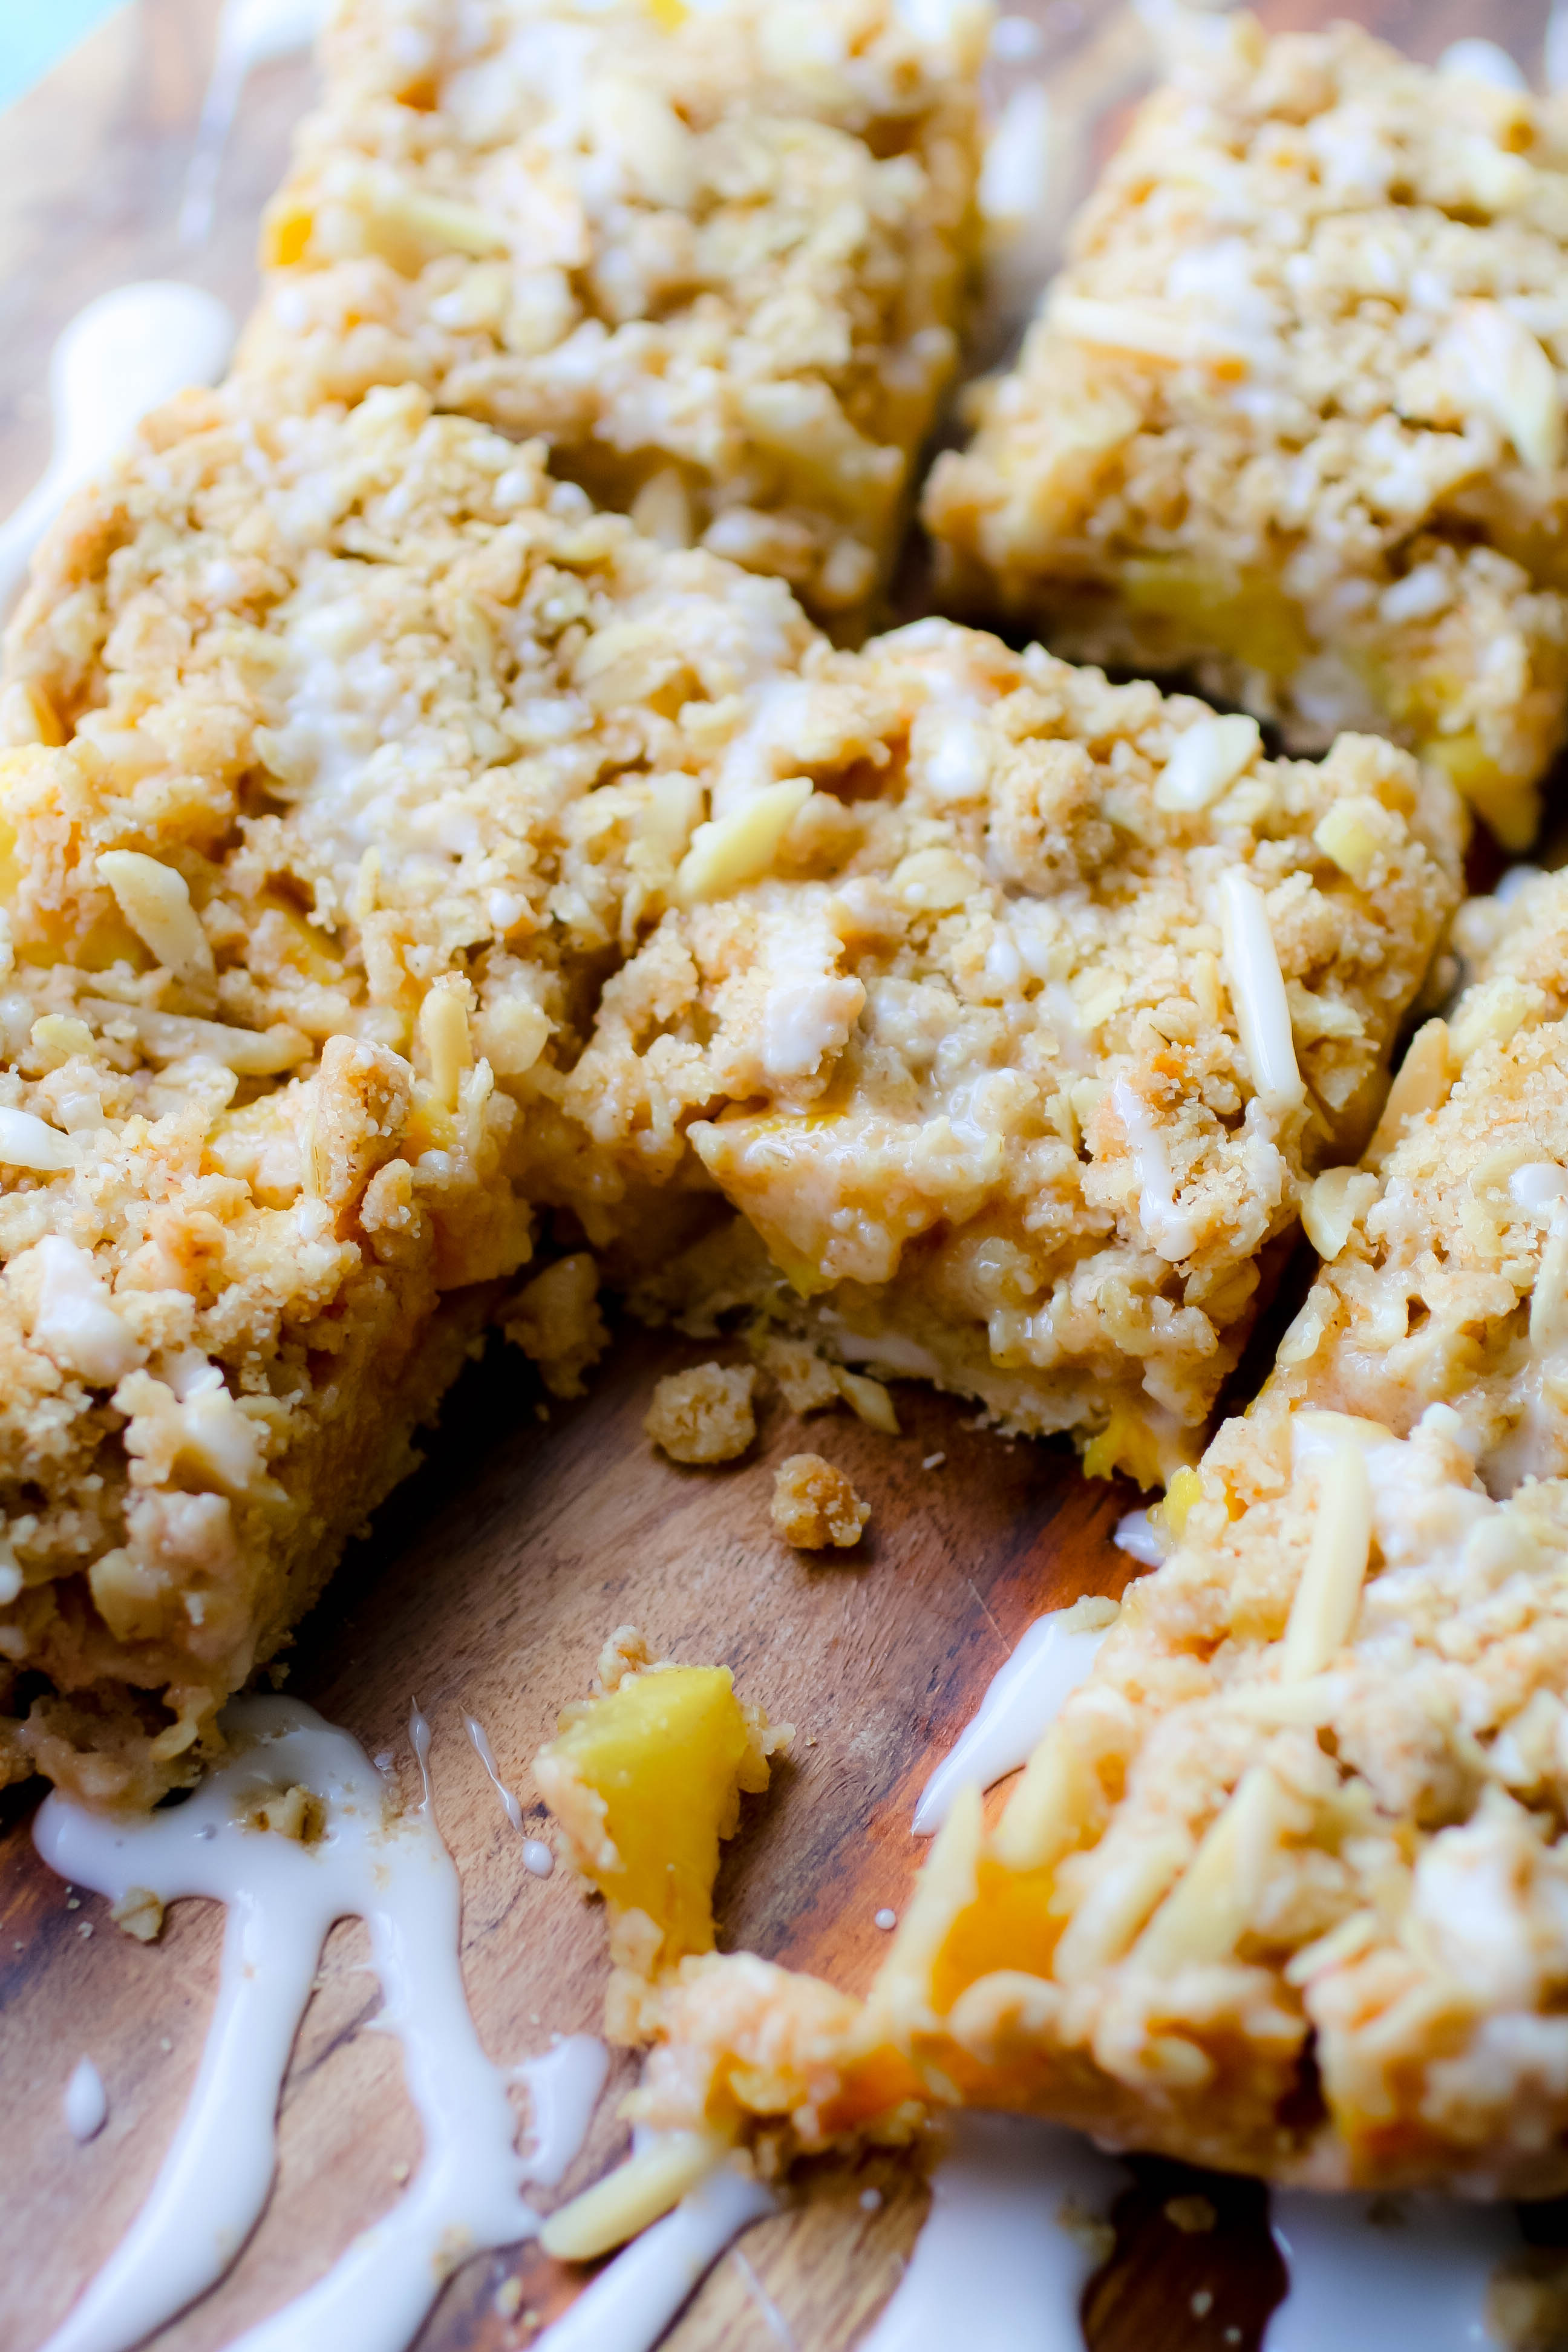 Peach Crumble Squares with Bourbon Glaze are the perfect sweet treat for the summer. Use up summer's peaches to make these Peach Crumble Squares with Bourbon Glaze.